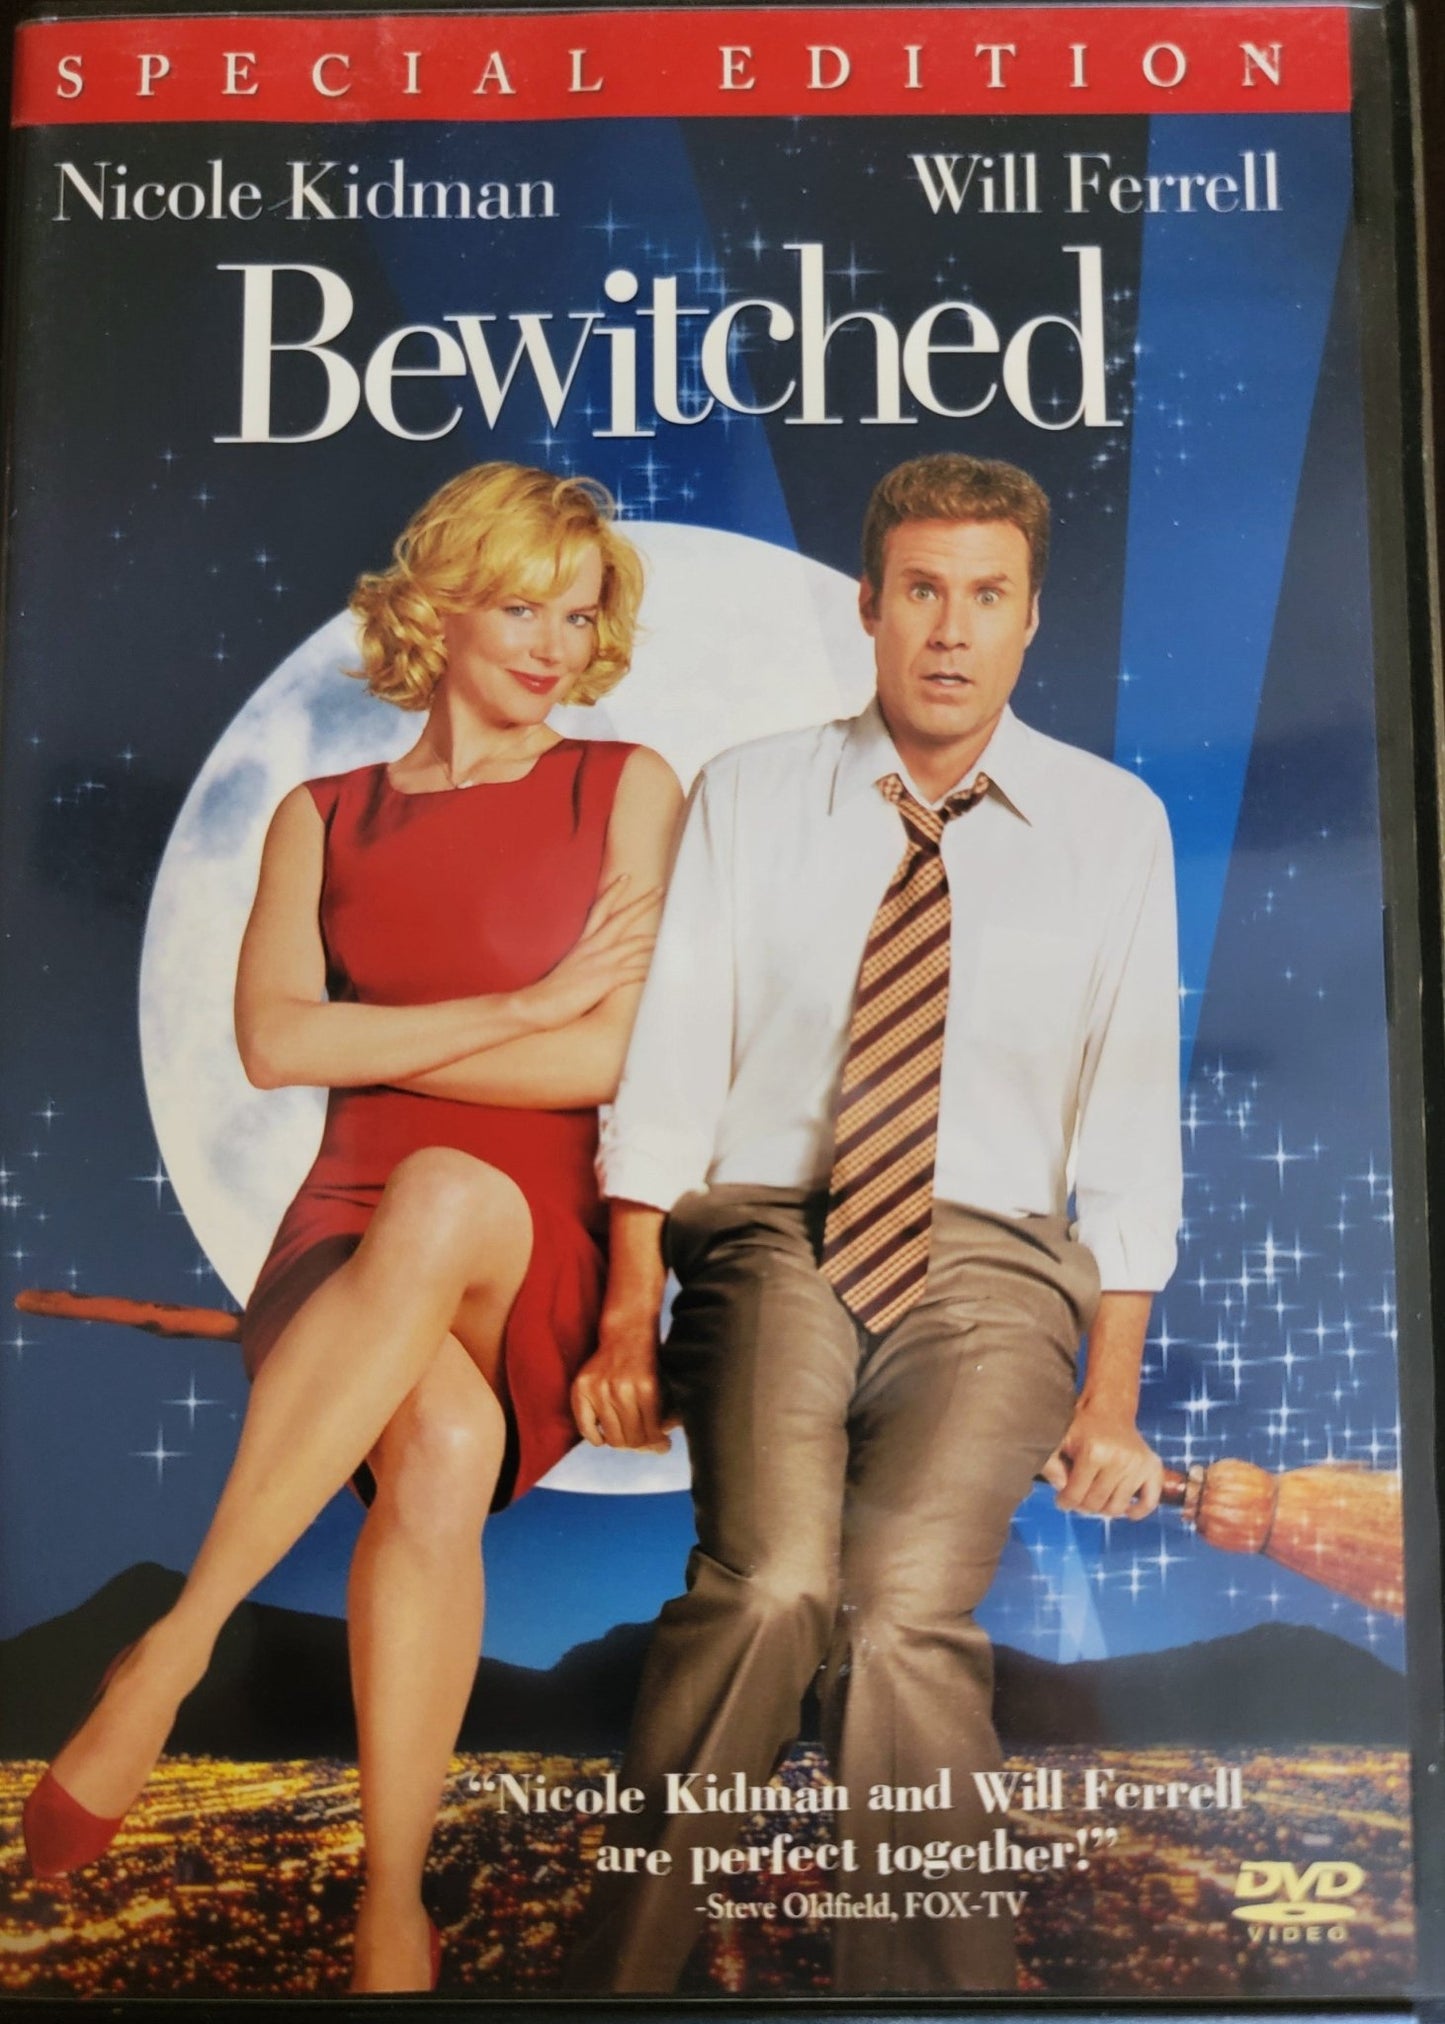 Columbia Pictures - Bewitched | DVD | Special Edition Widescreen - DVD - Steady Bunny Shop